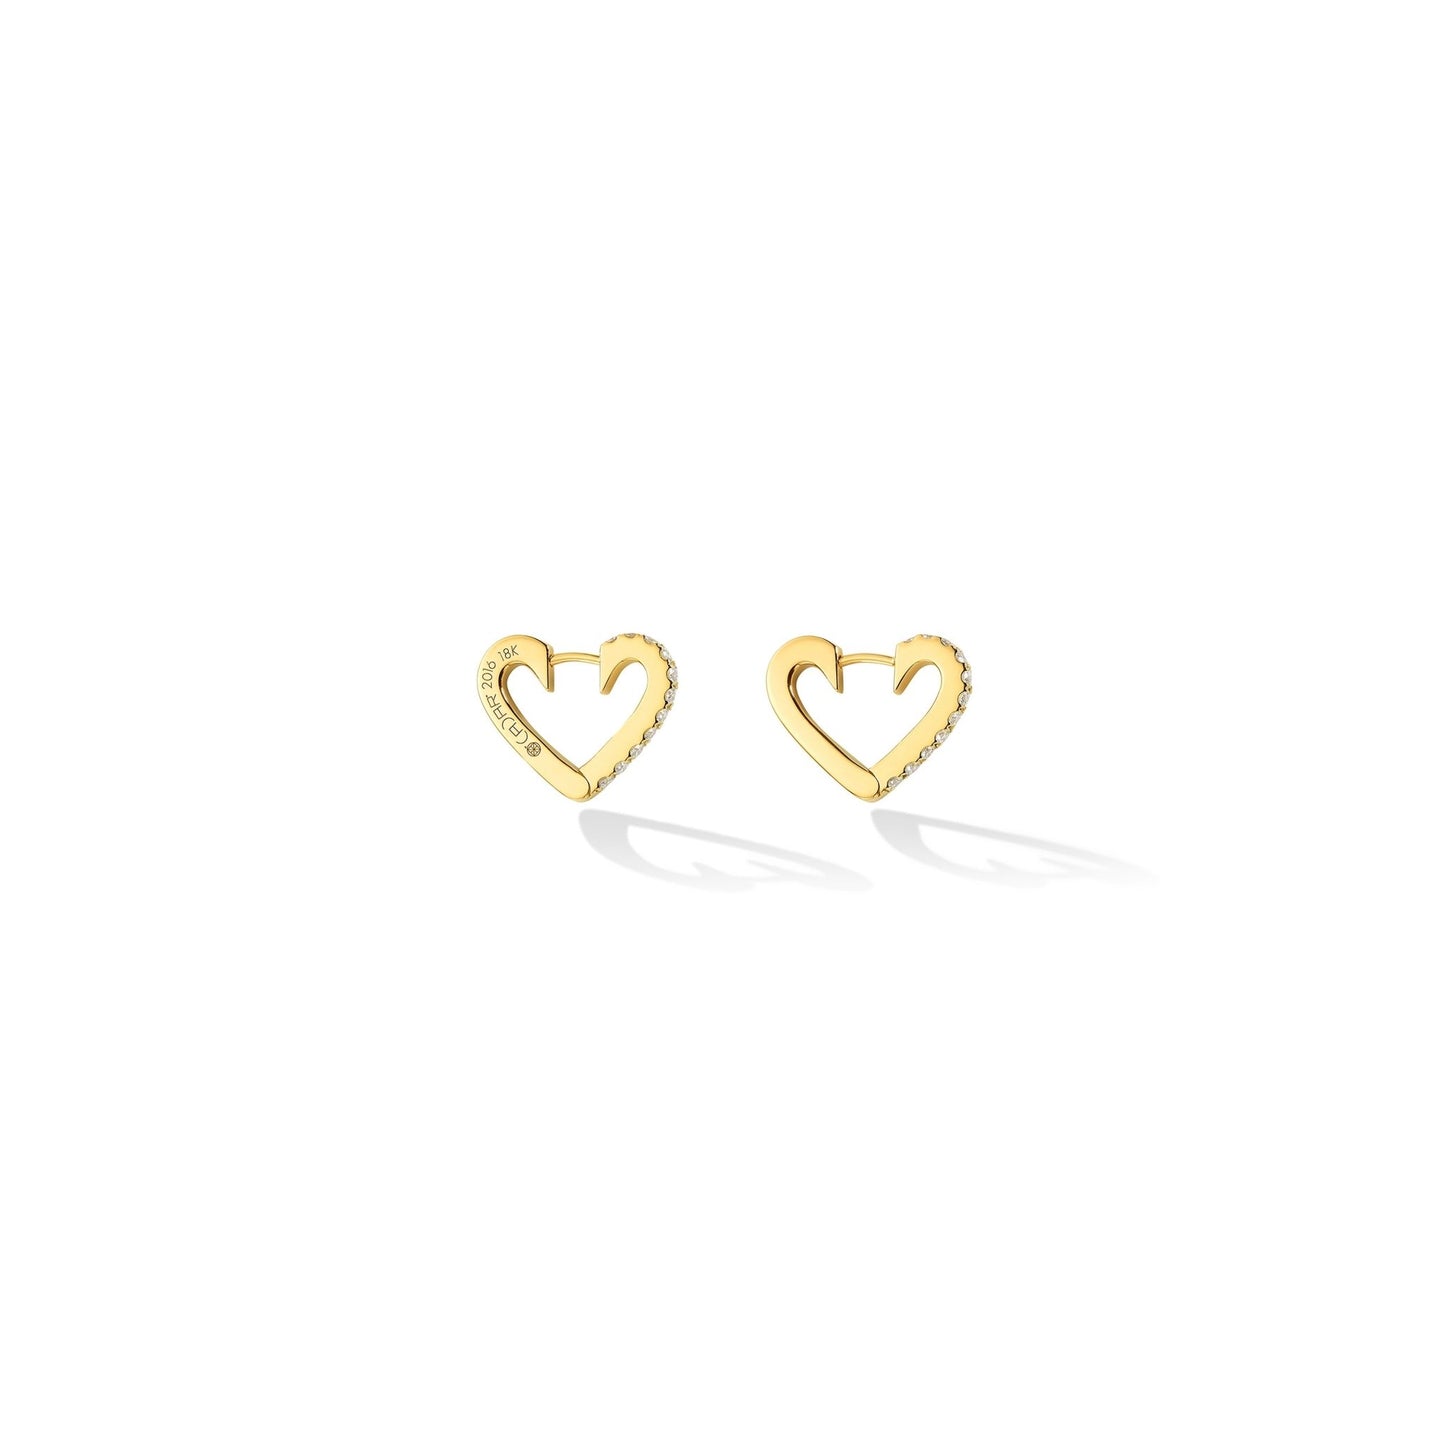 Small Yellow Gold Endless Hoop Earrings with White Diamonds - Cadar